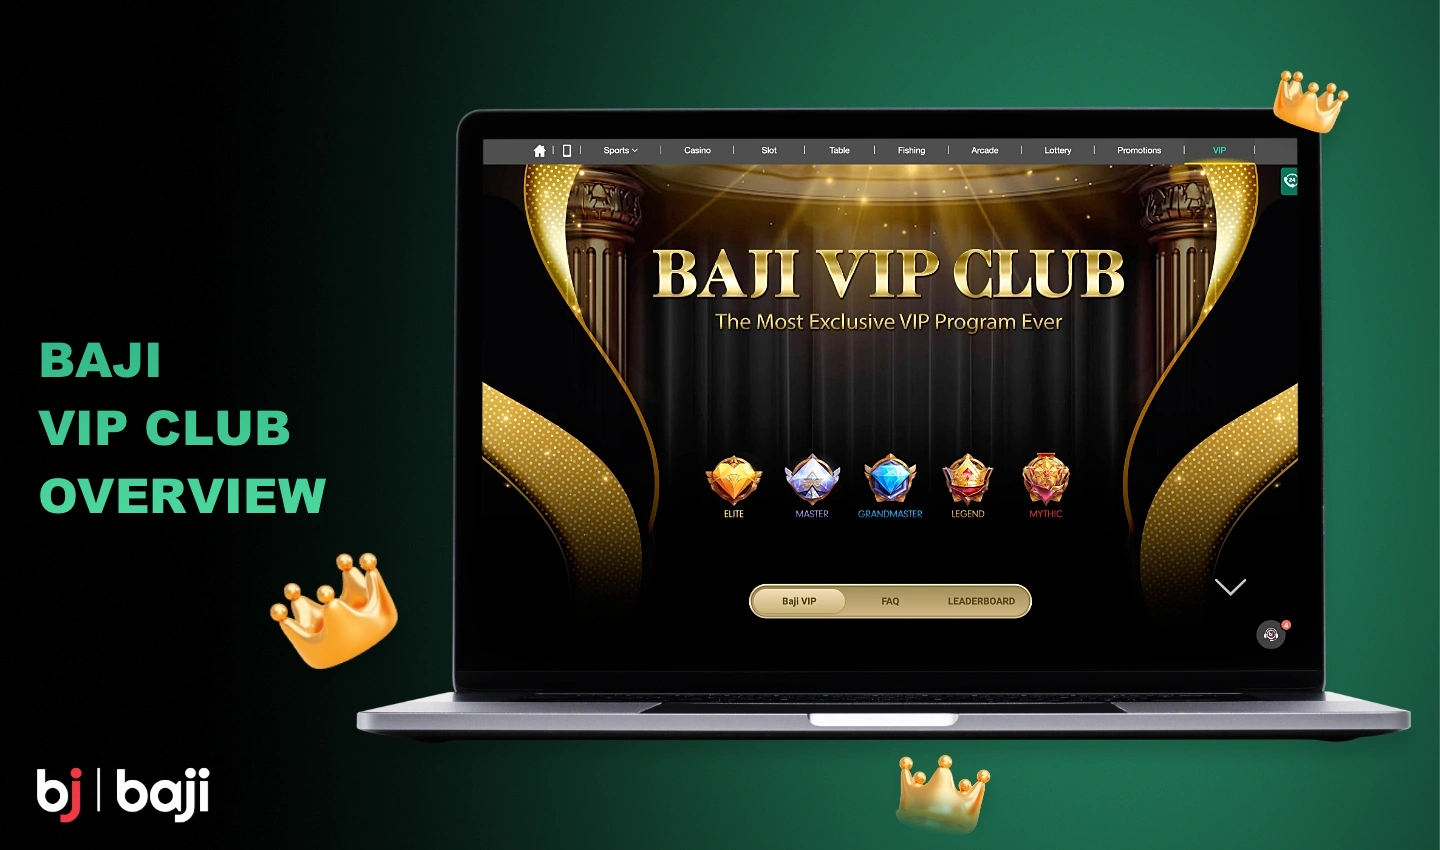 Baji VIP club is a special program that allows you to earn extra rewards